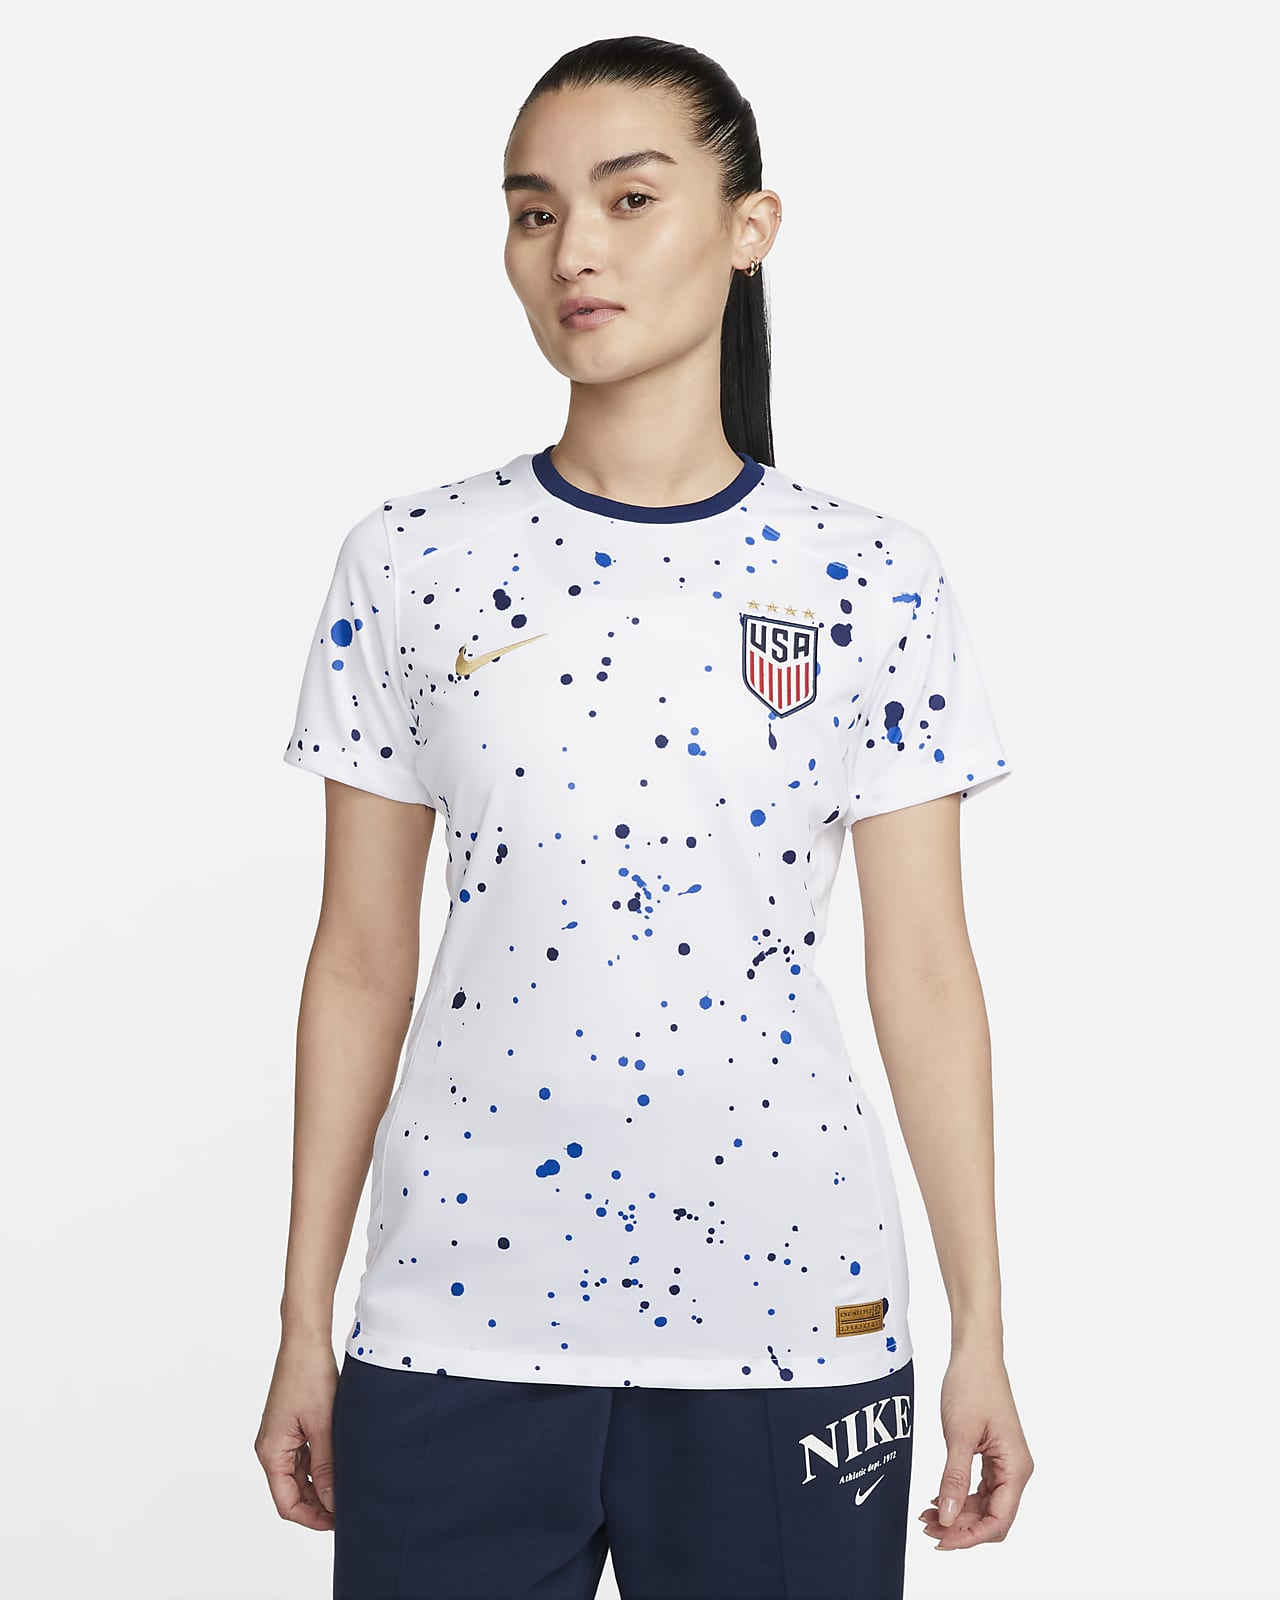 Nike Soccer thinks women's jerseys need to show more skin - Stars and  Stripes FC